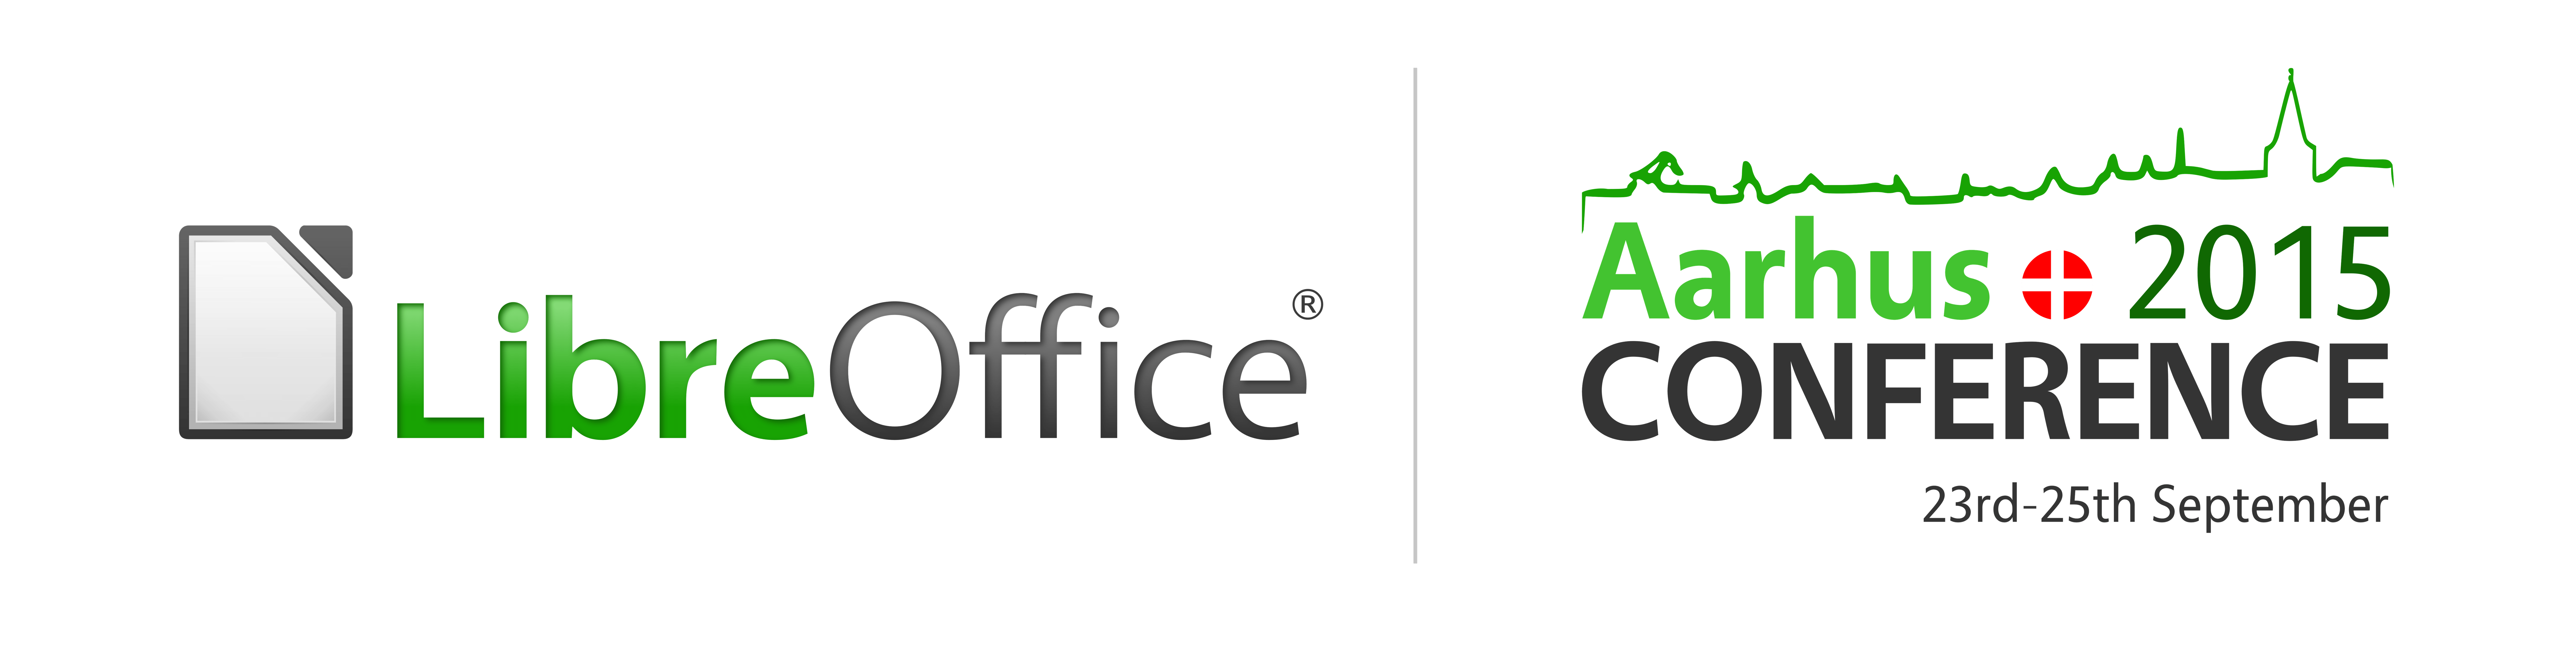 LibreOffice Logo - LibreOffice Annual Conference - Aarhus 2015 - The Document ...